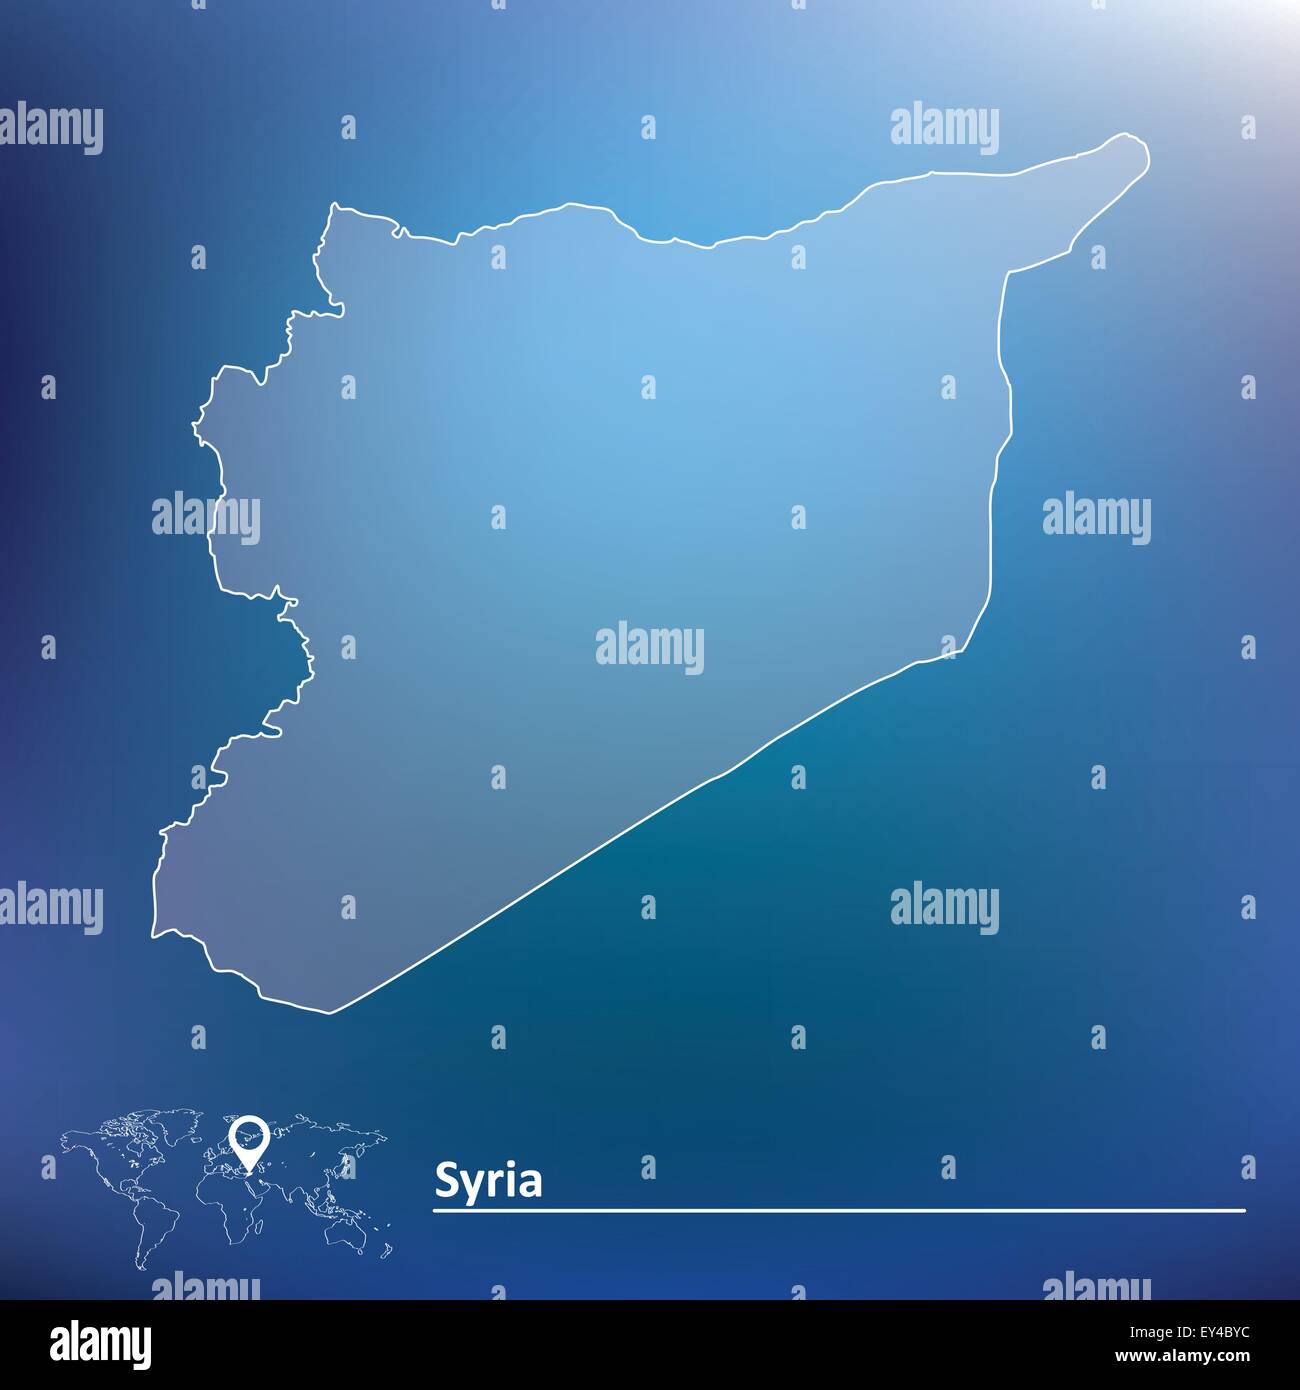 Map of Syria - vector illustration Stock Vector